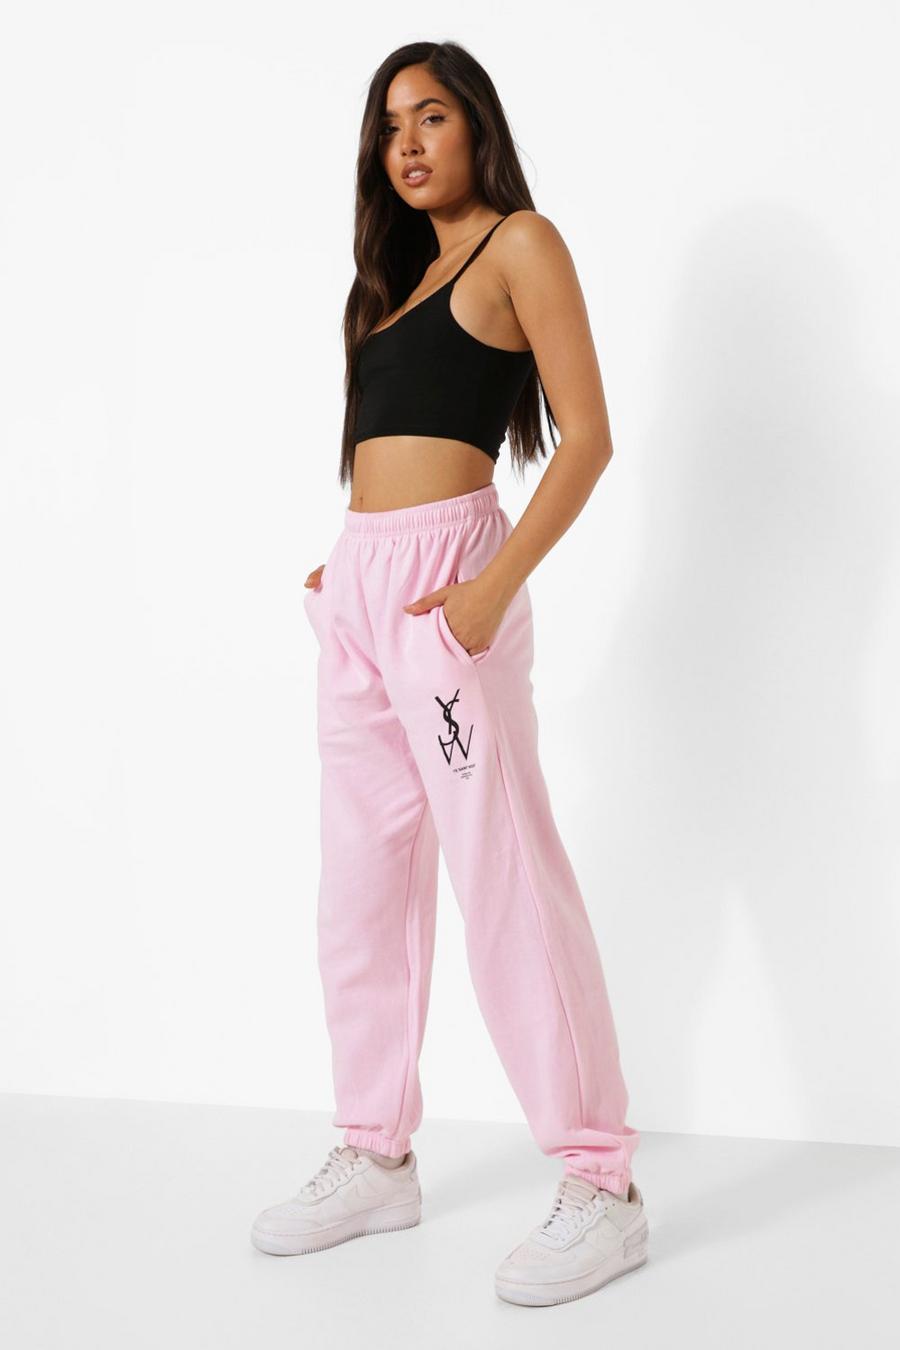 Light pink Oversized Ysw Print Joggers image number 1